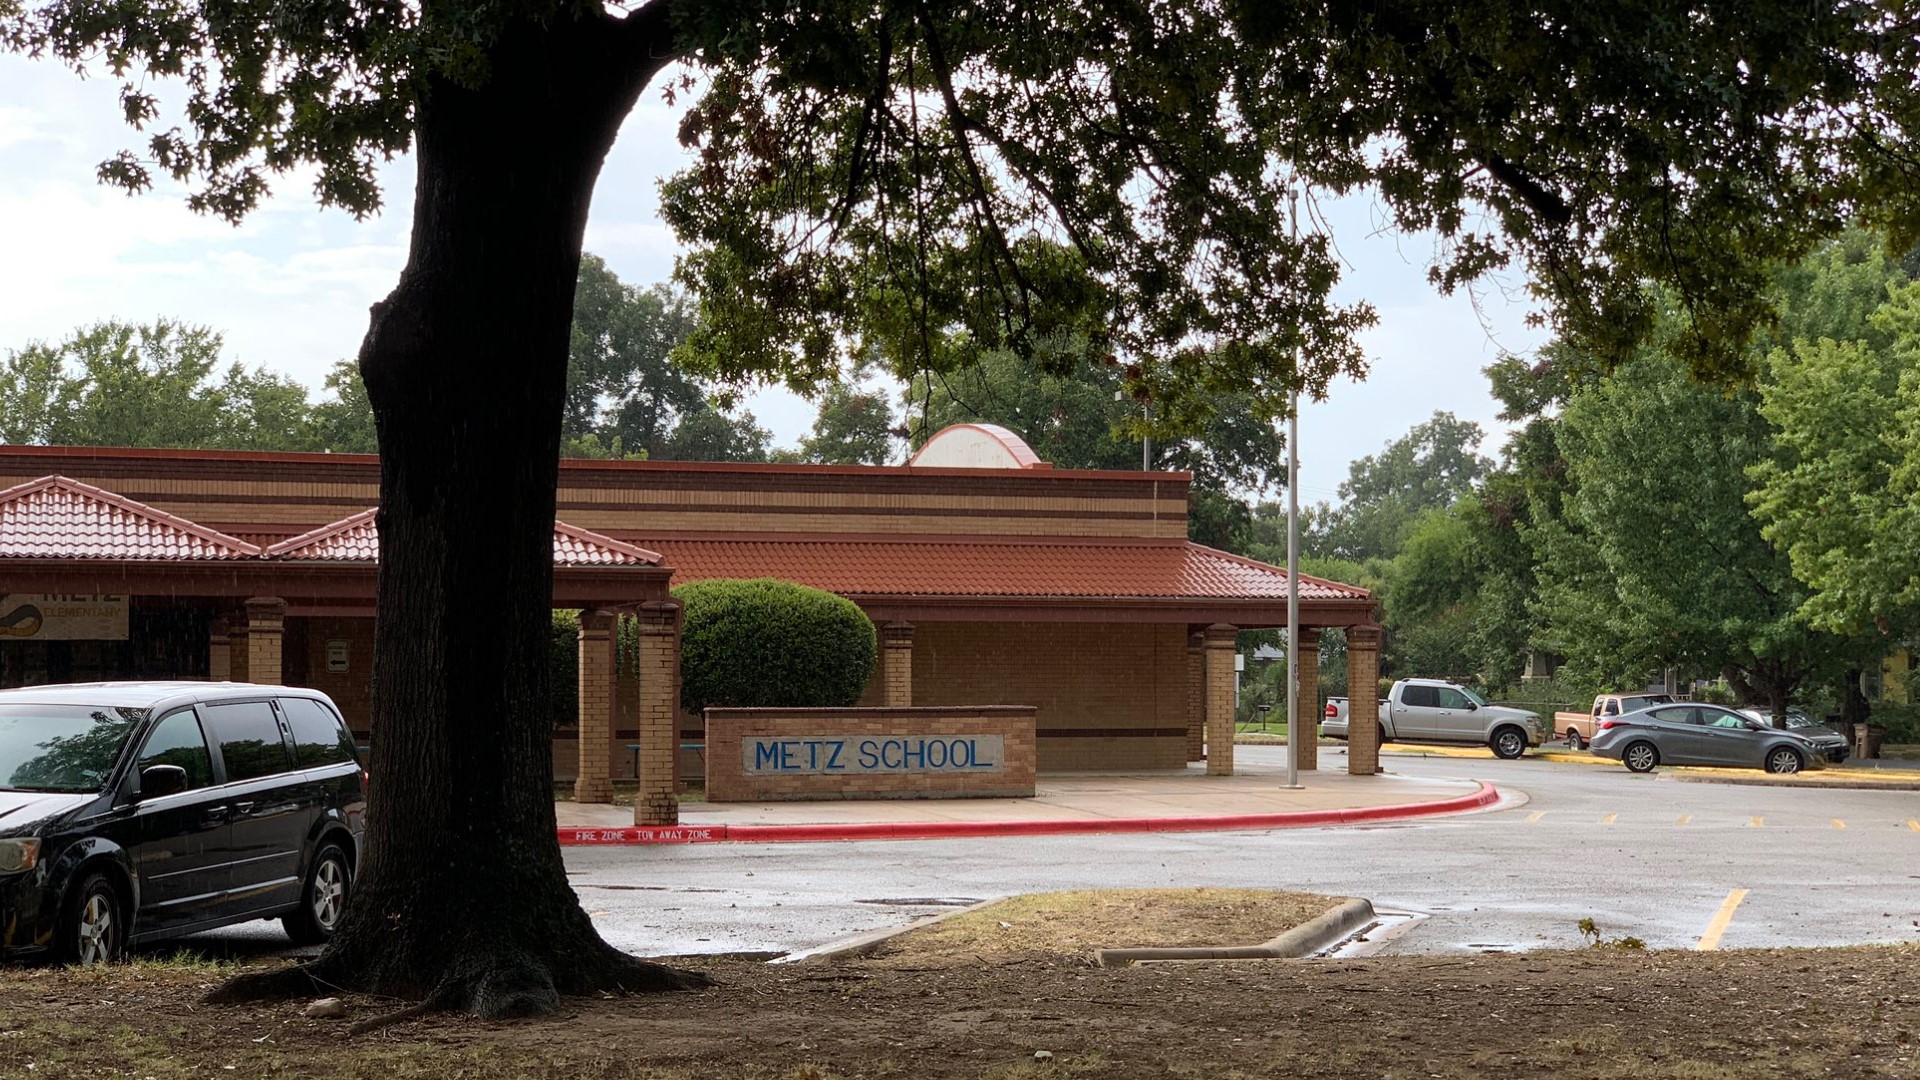 Austin Public Health said the decision to close the site was made because COVID-19 testing and vaccines are "now widely available in the region."